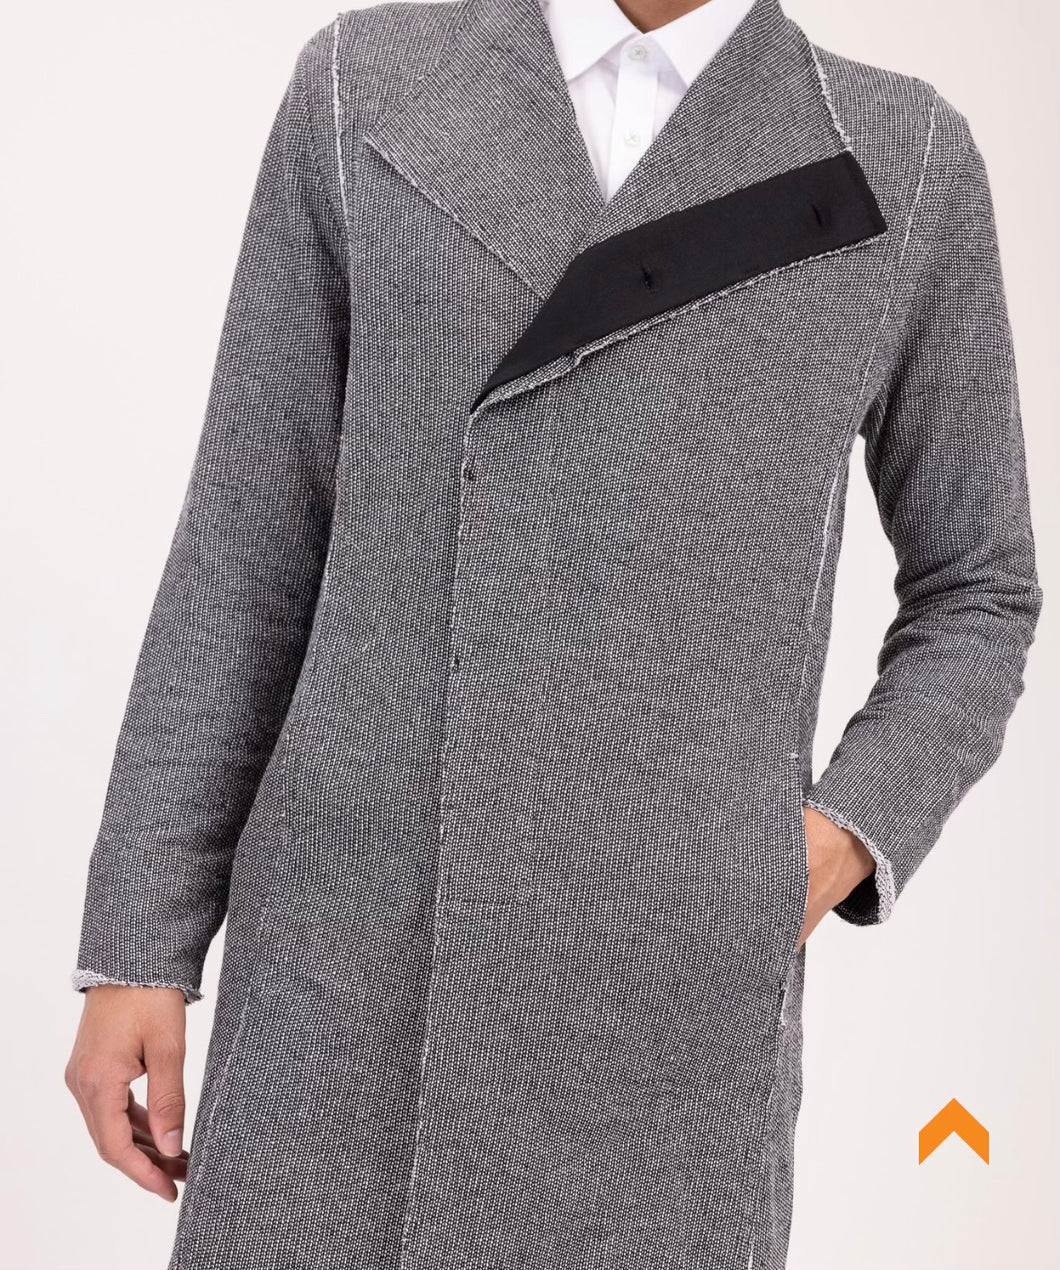 Abstract Sweater Knit Gray Cardigan- Men